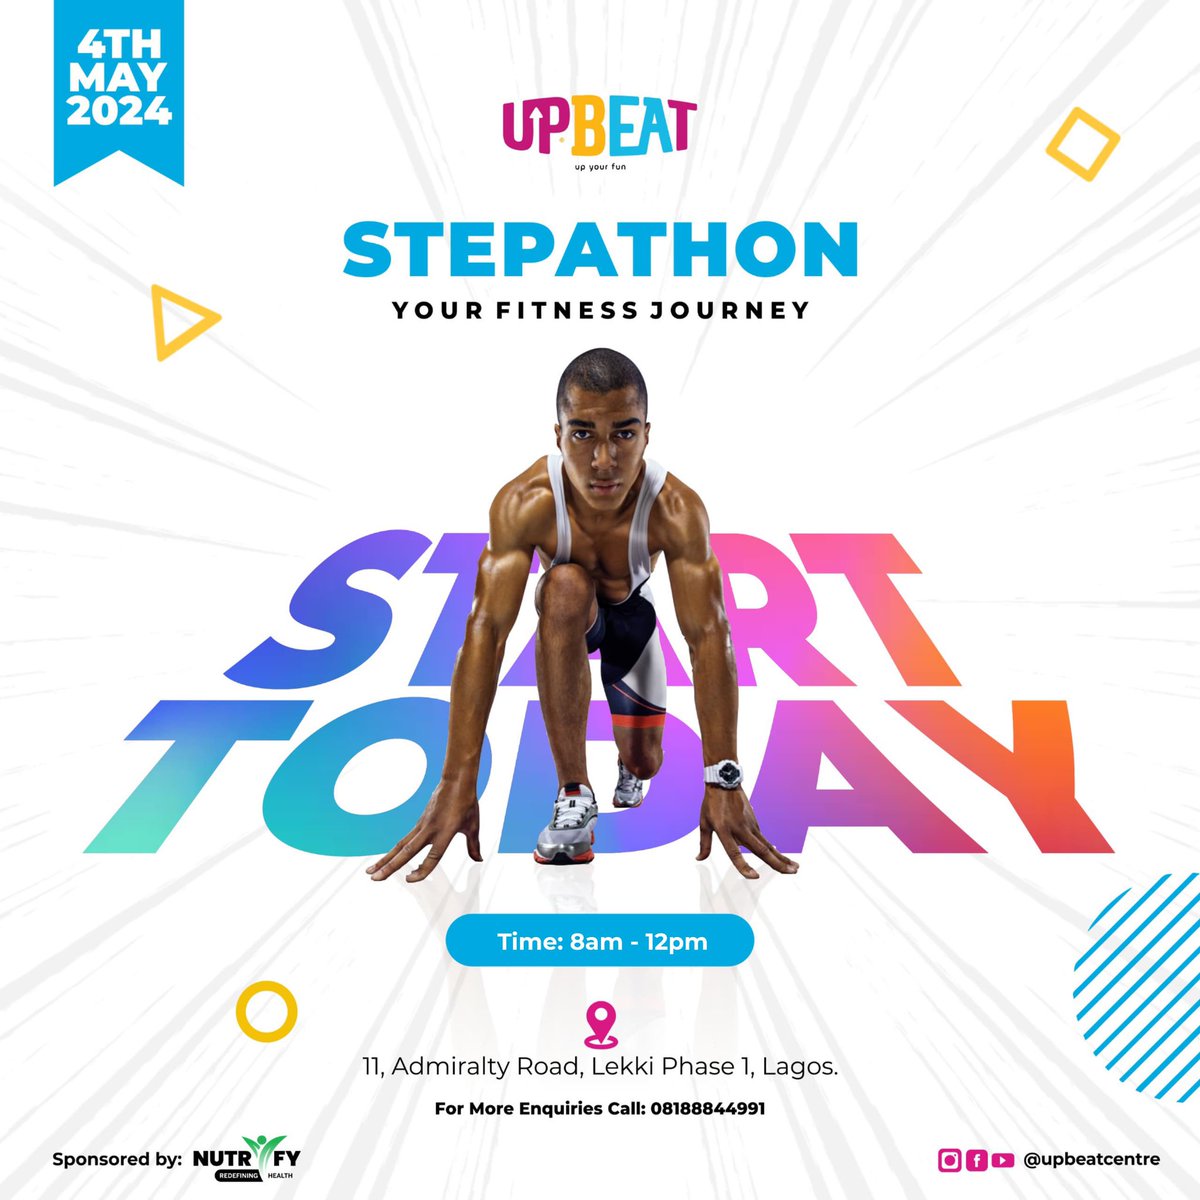 The long awaited Upbeat Stepathon is today!!! 📍Upbeat Centre, 11 Admiralty Rd, Lekki phase 1, Lagos. ⏰ starts 8am to 12pm Let's get moving together! Sponsored by @NutrifyNigeria #UpbeatLife #FitnessFrenzy #LagosFun #upbeat #Upbeatcentre #funactivities #funinlagos